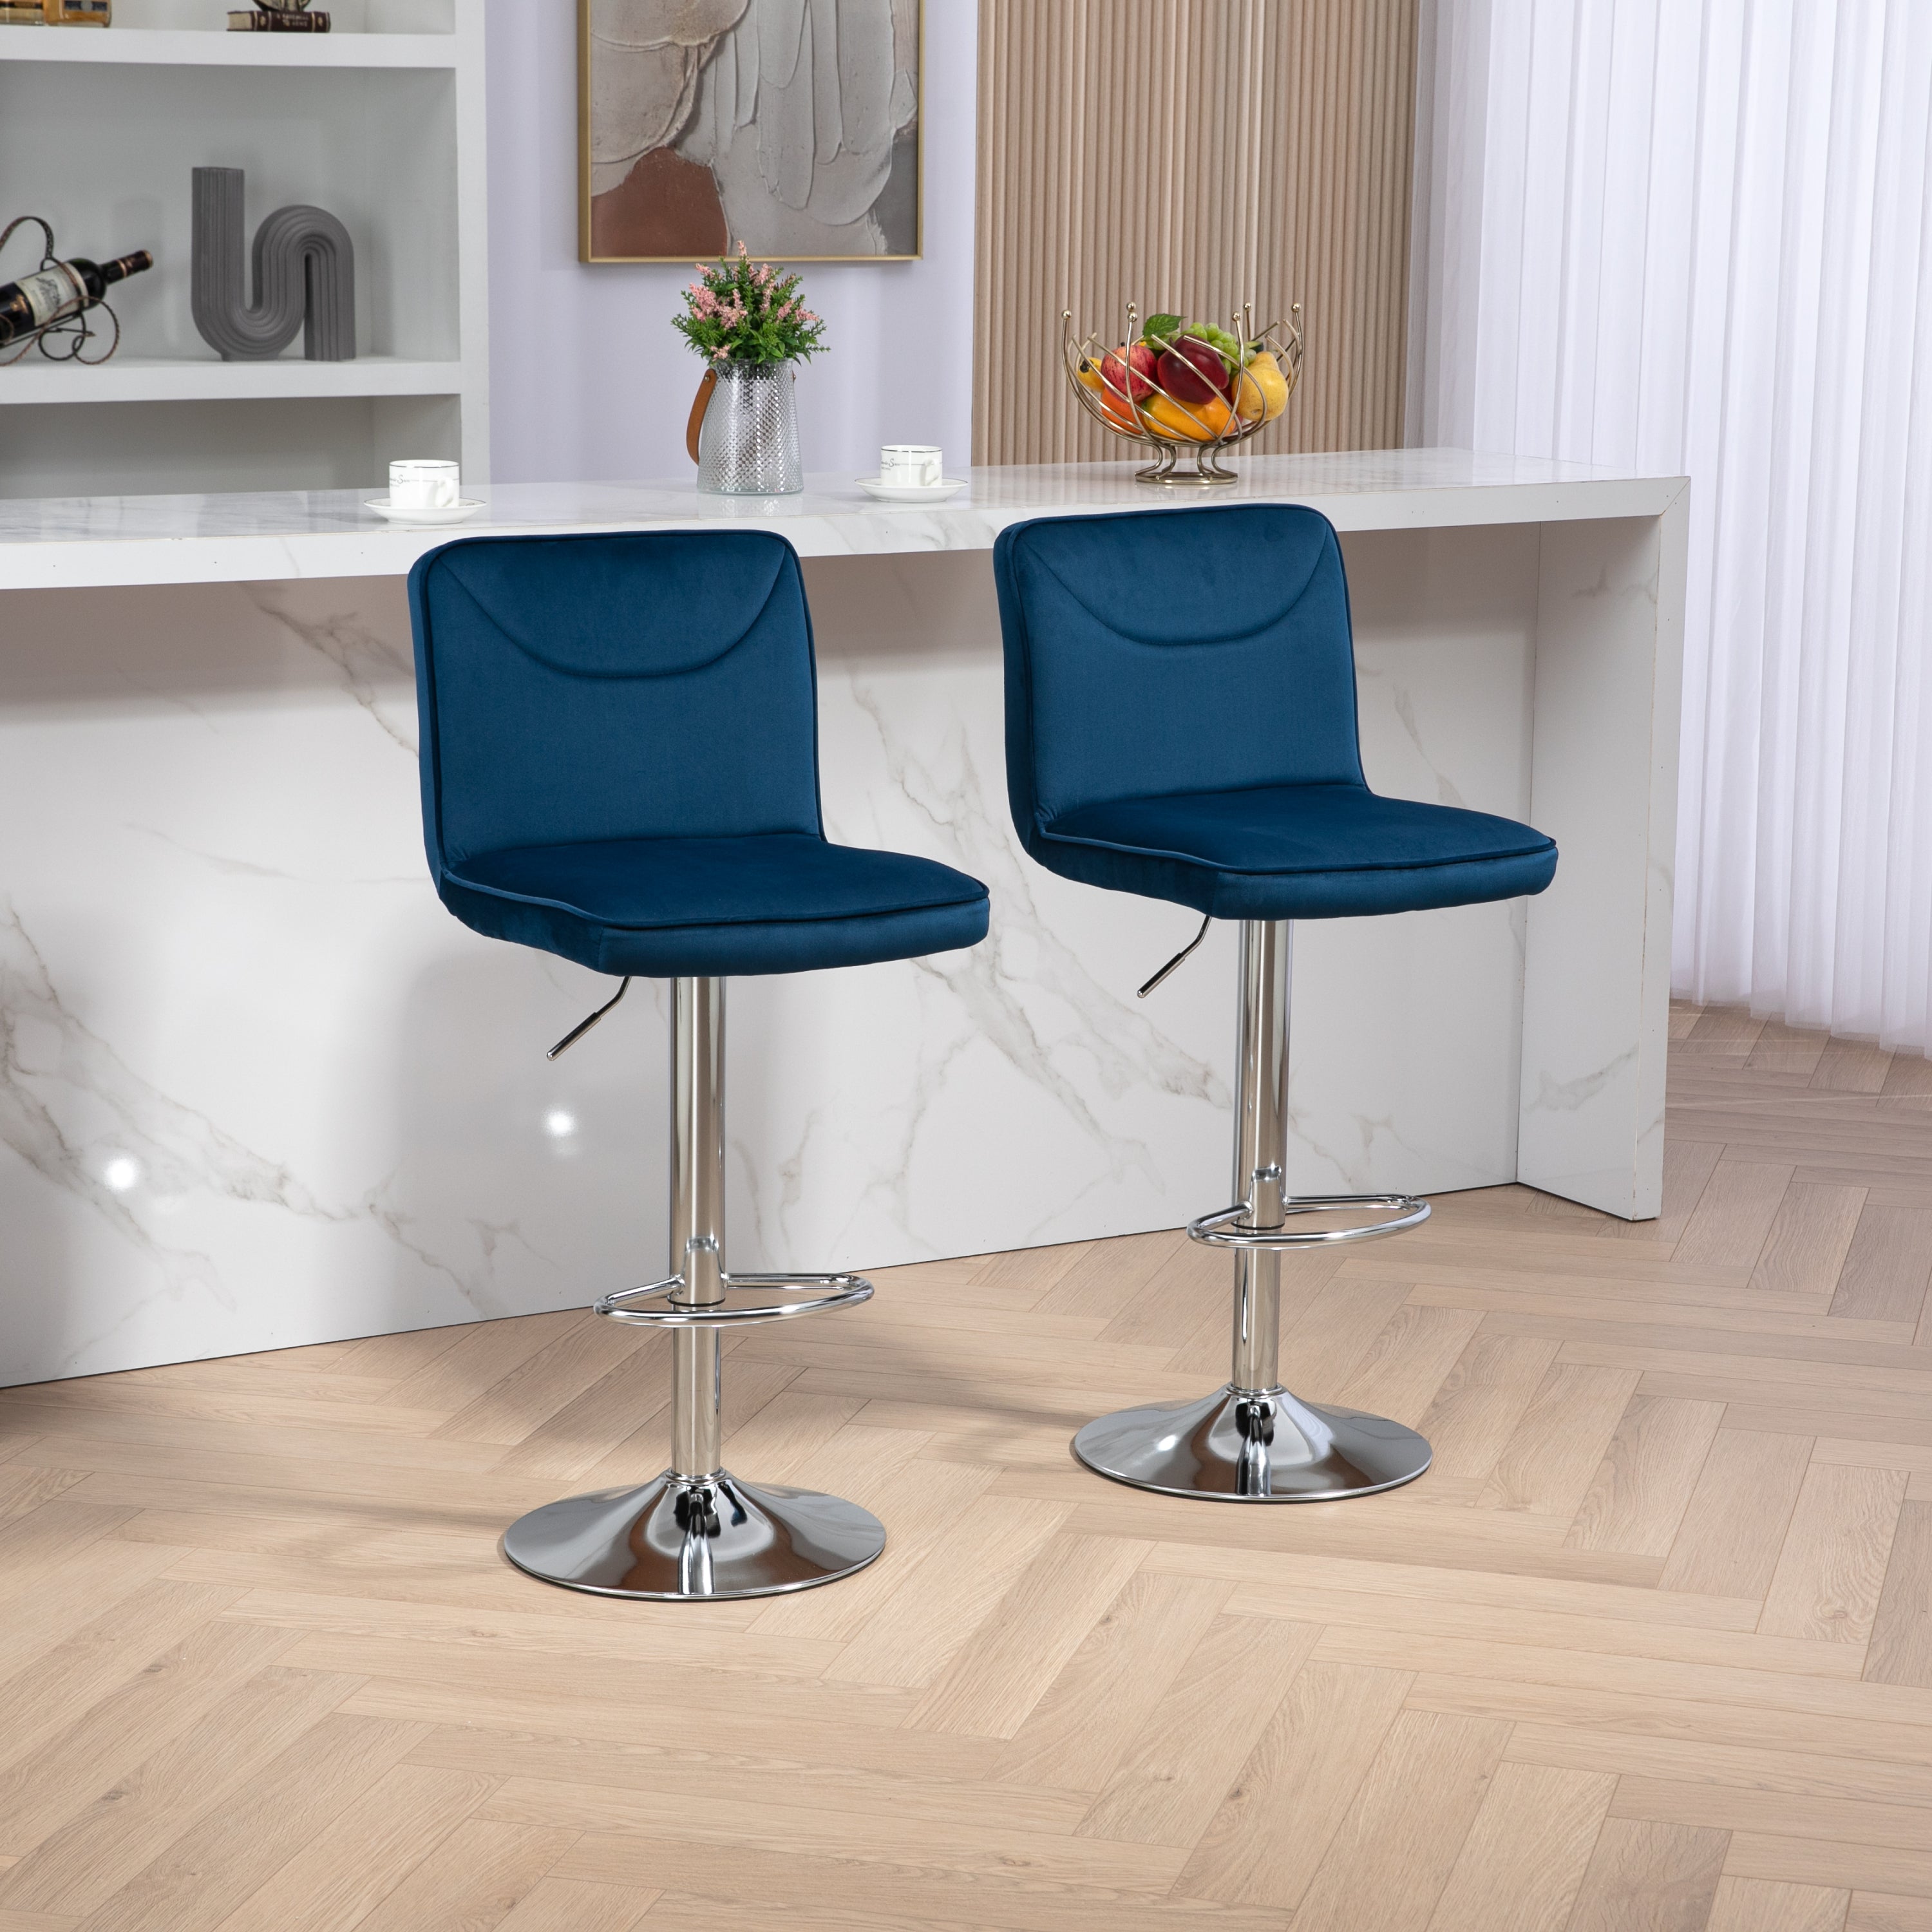 🆓🚛 Modern Swivel Bar stools Set of 2, Adjustable Counter Height Bar Chairs, with Backrest Footrest, Chrome Base, Navy Blue